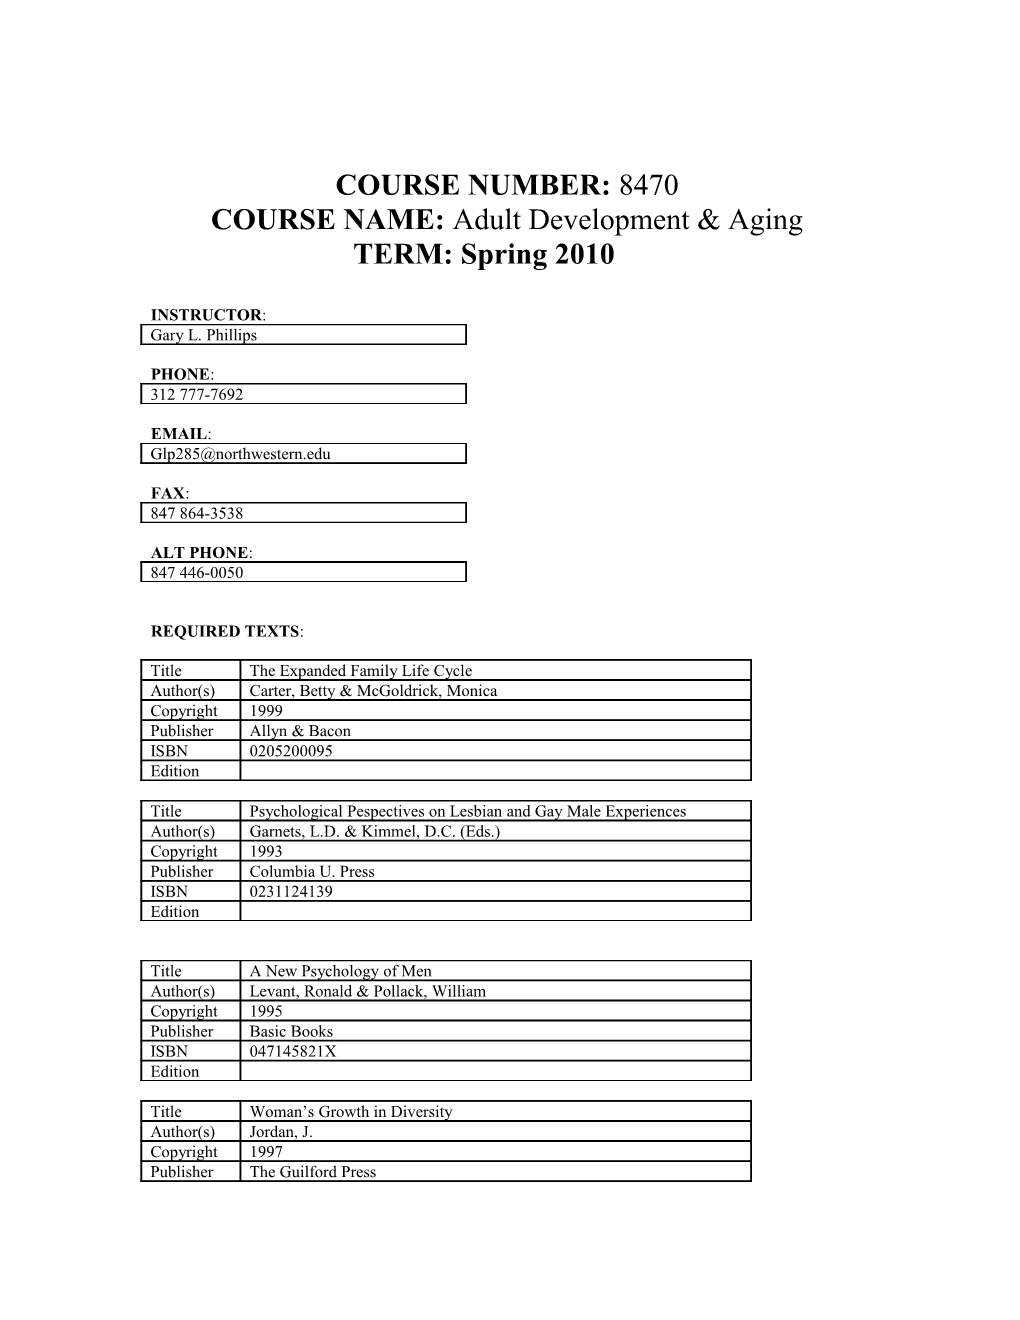 COURSE NAME: Adult Development & Aging